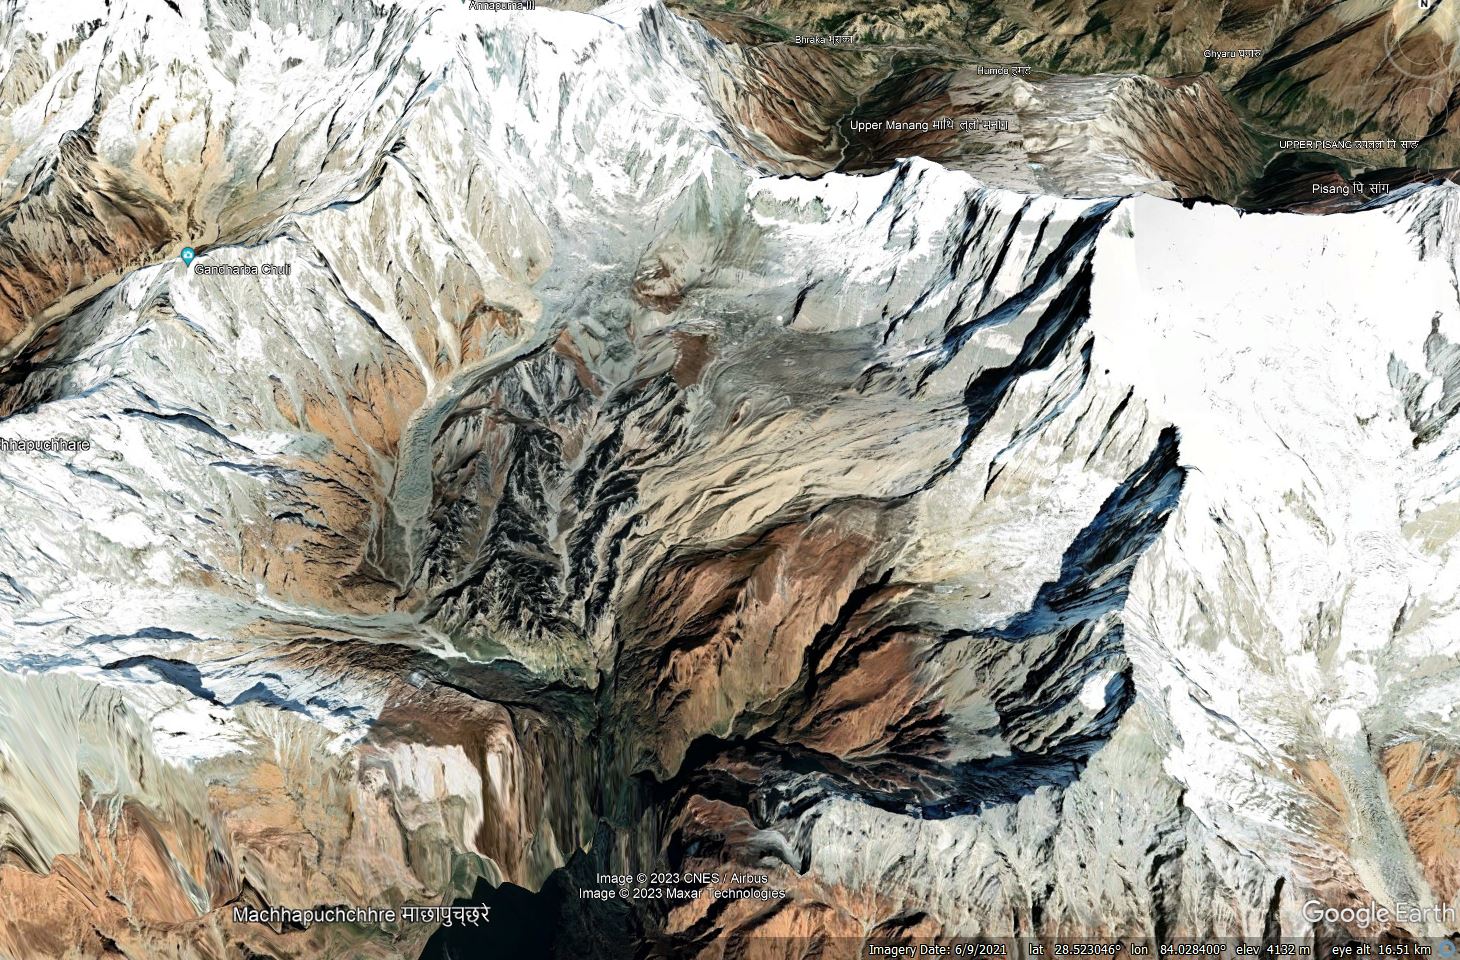 Google Earth image of the source zone of the Sabche rockslide from the Annapurna massif in Nepal.